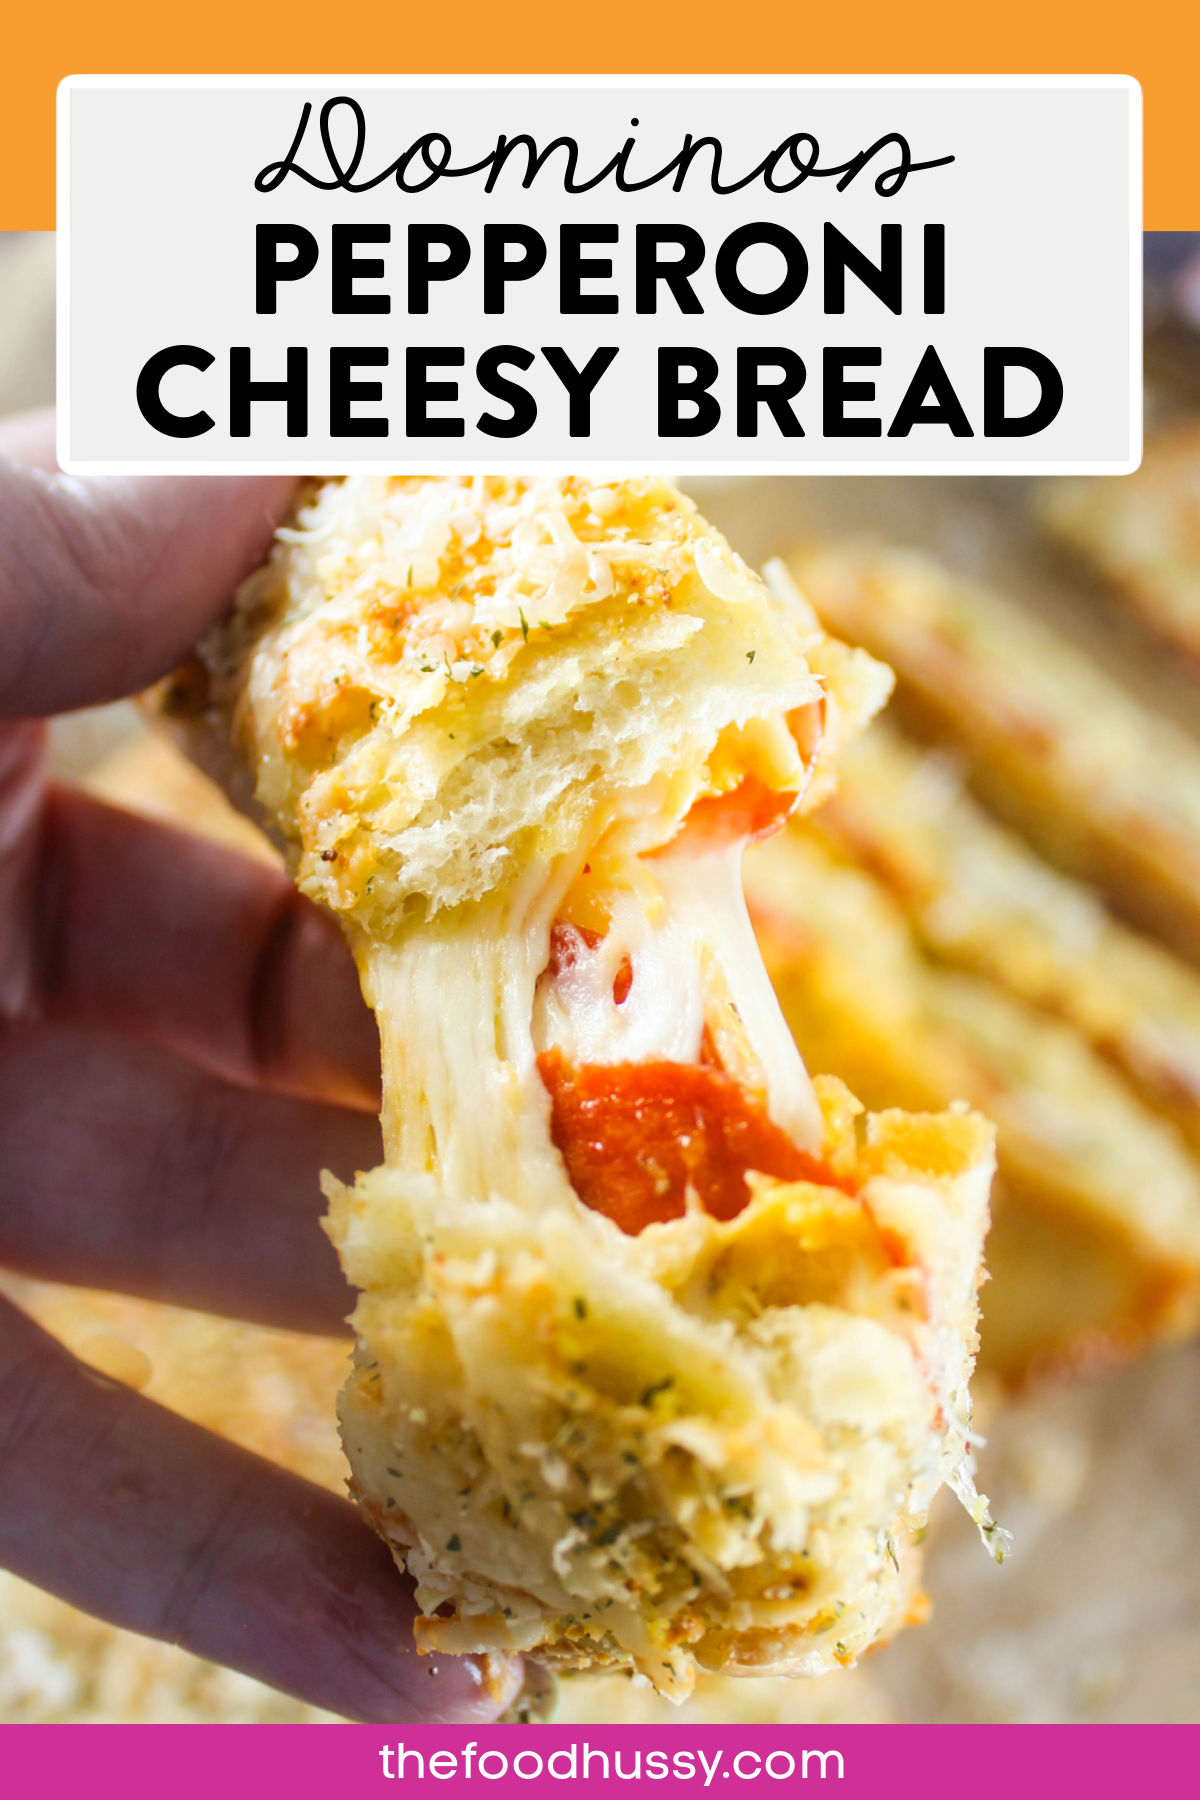 Domino's new Pepperoni Stuffed Cheesy Bread takes all the best parts of pepperoni pizza and turns them into a snackable breadstick! Dip them in garlic sauce and marinara sauce and you will have a happy happy family! via @foodhussy